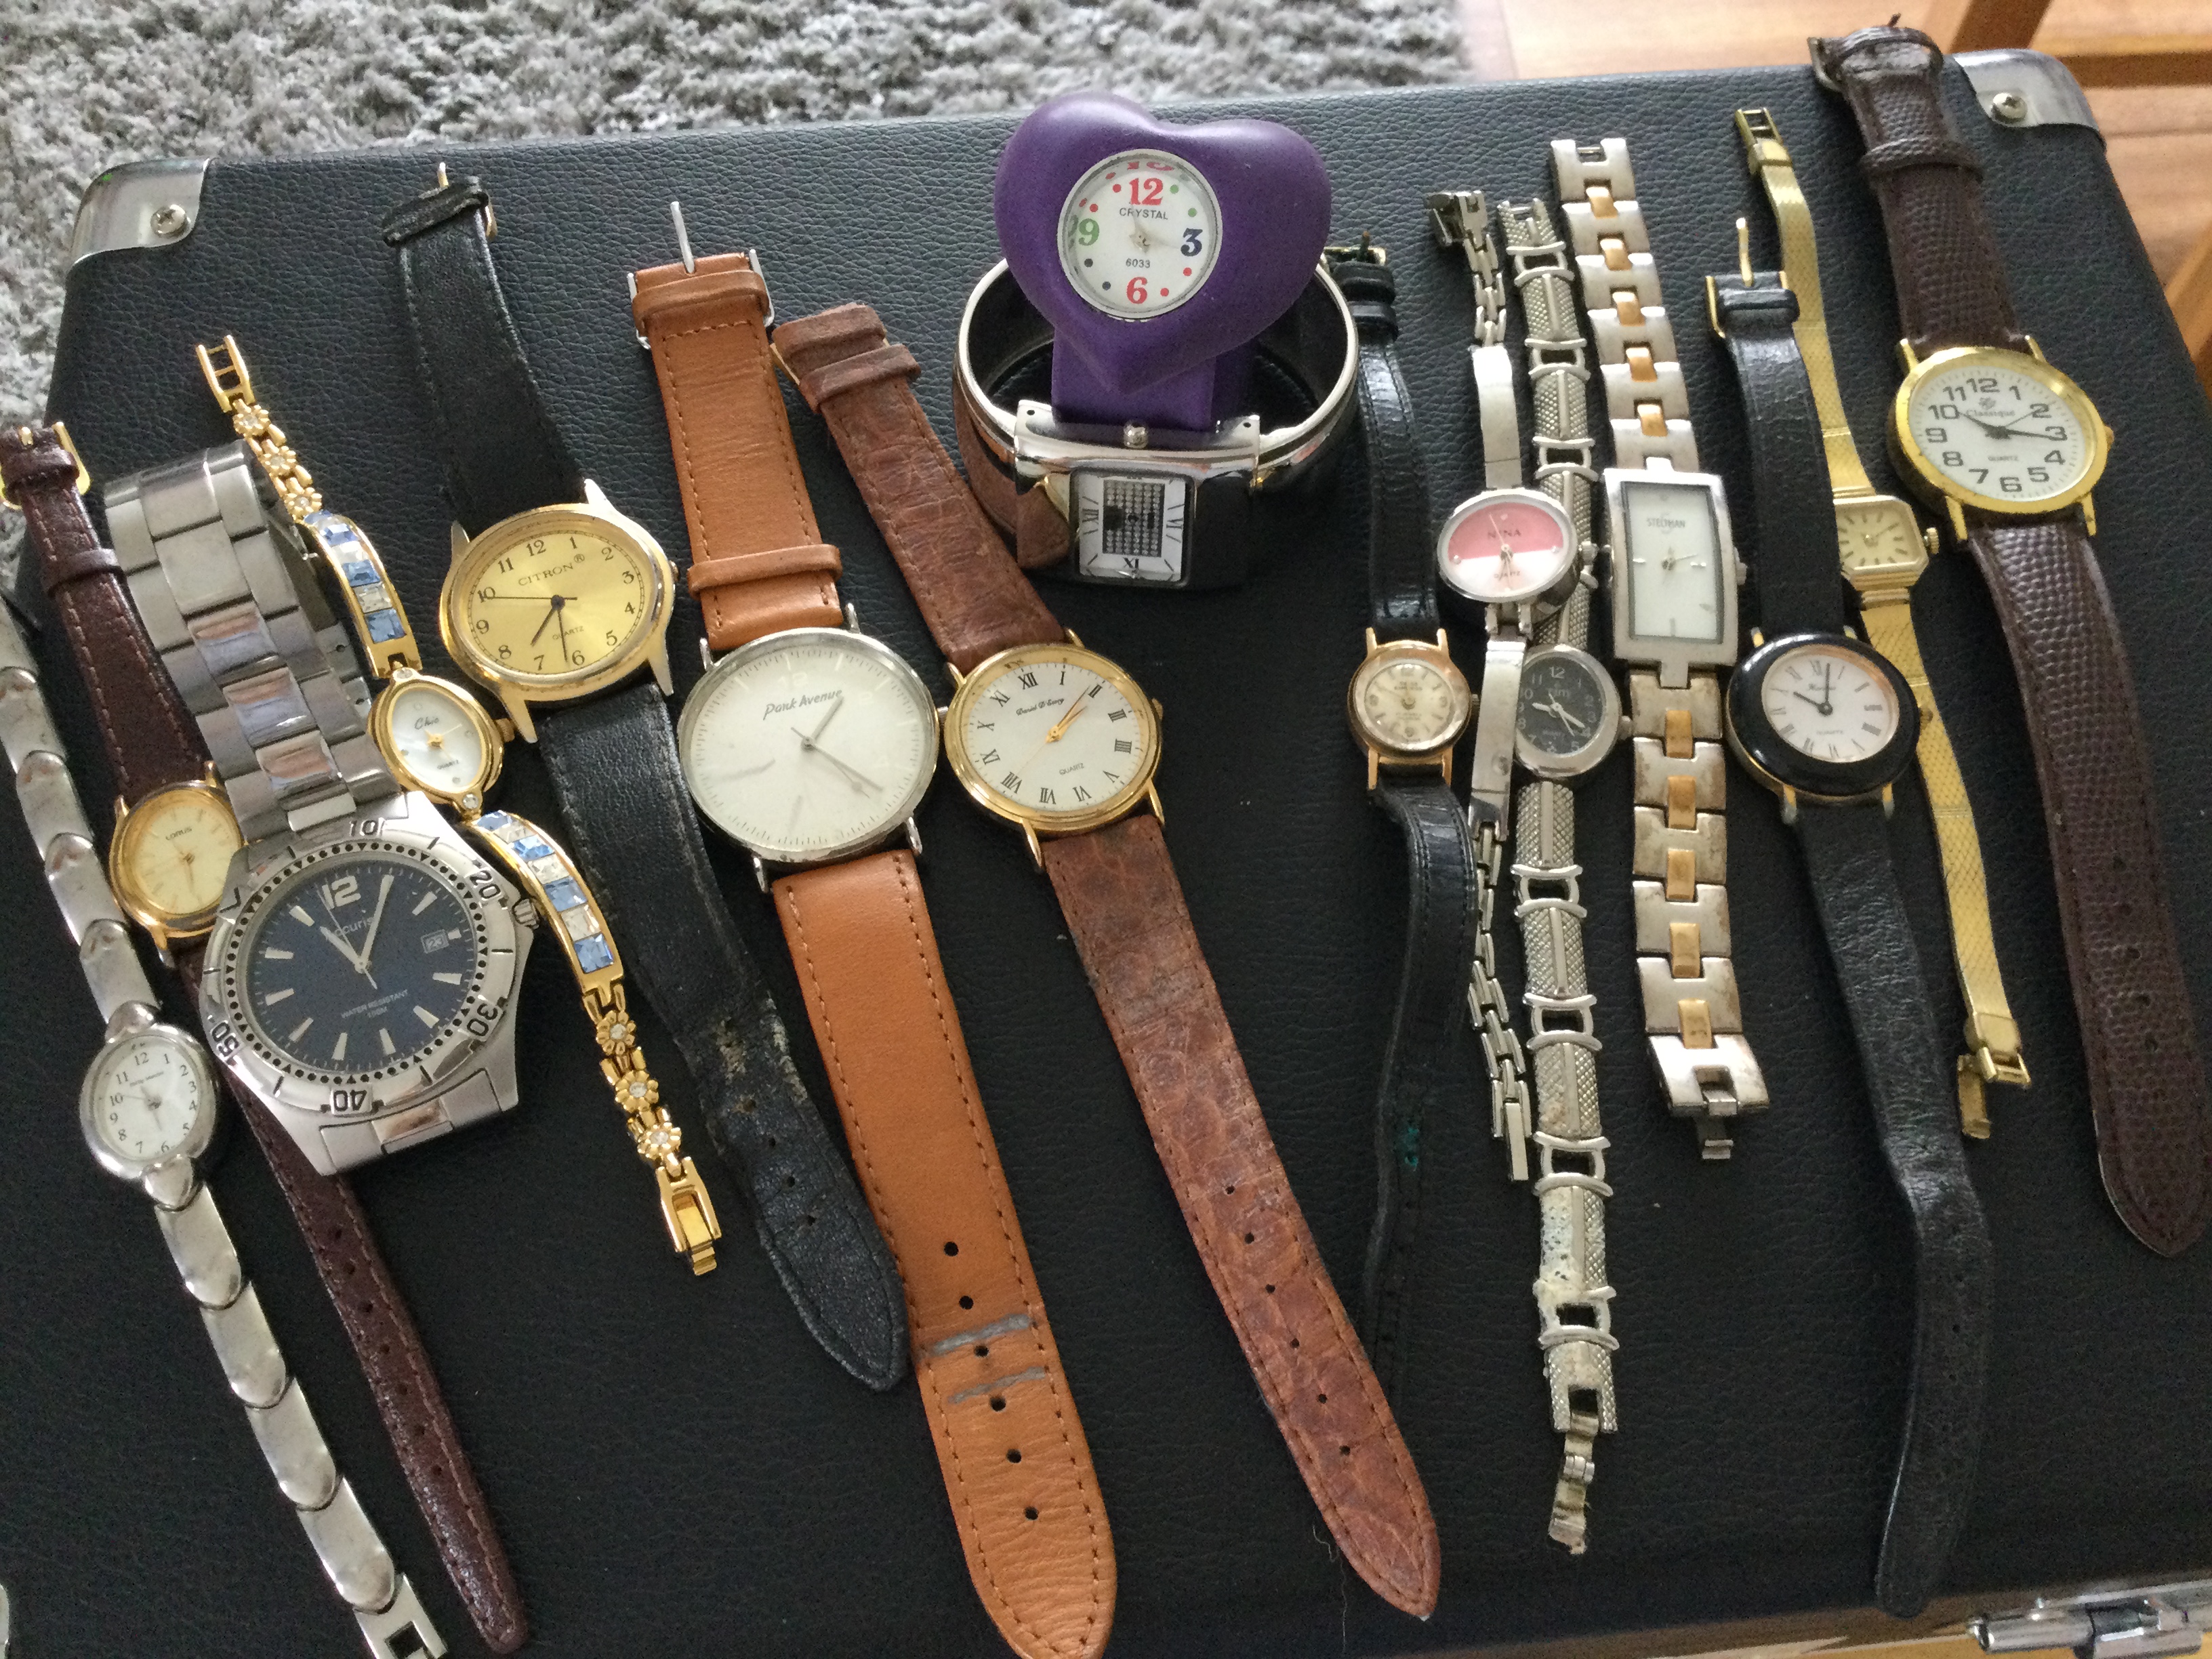 15 Ladies & Gents Watches, Gold Plated Lorus, Gold Plated Chic, Philip Mercer Etc (GS 69) Here